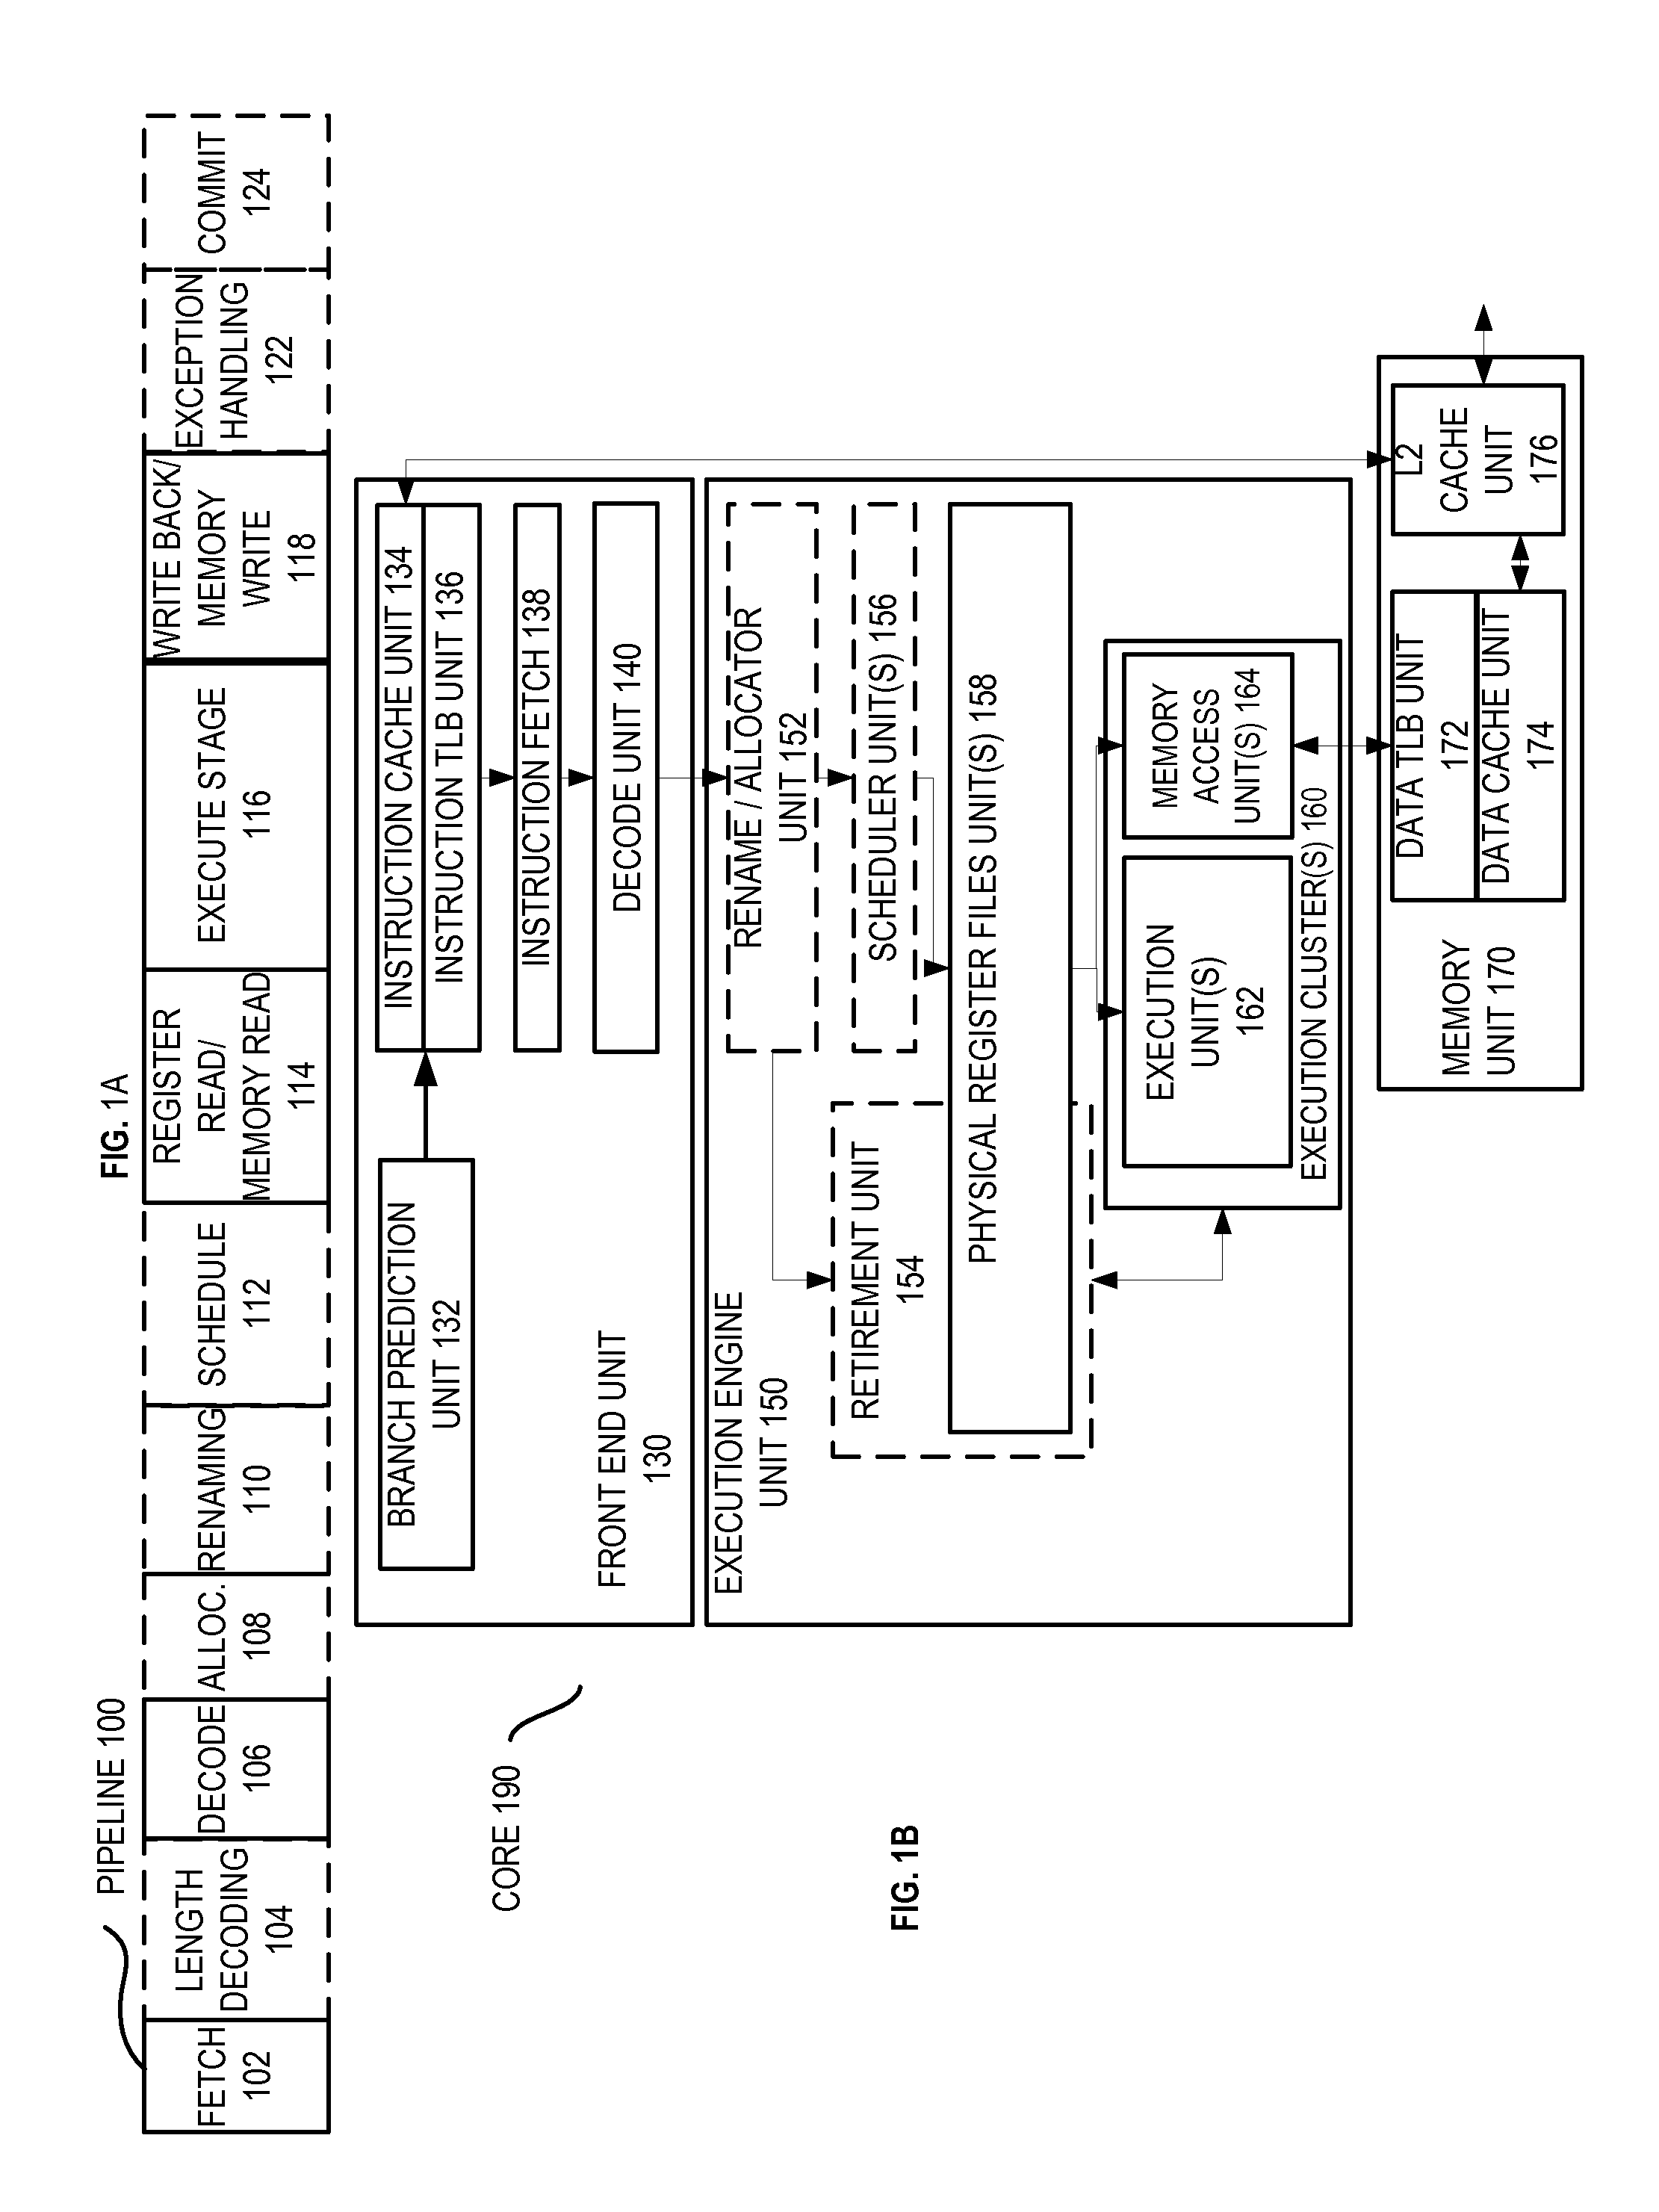 Method and apparatus for implementing dynamic portbinding within a reservation station